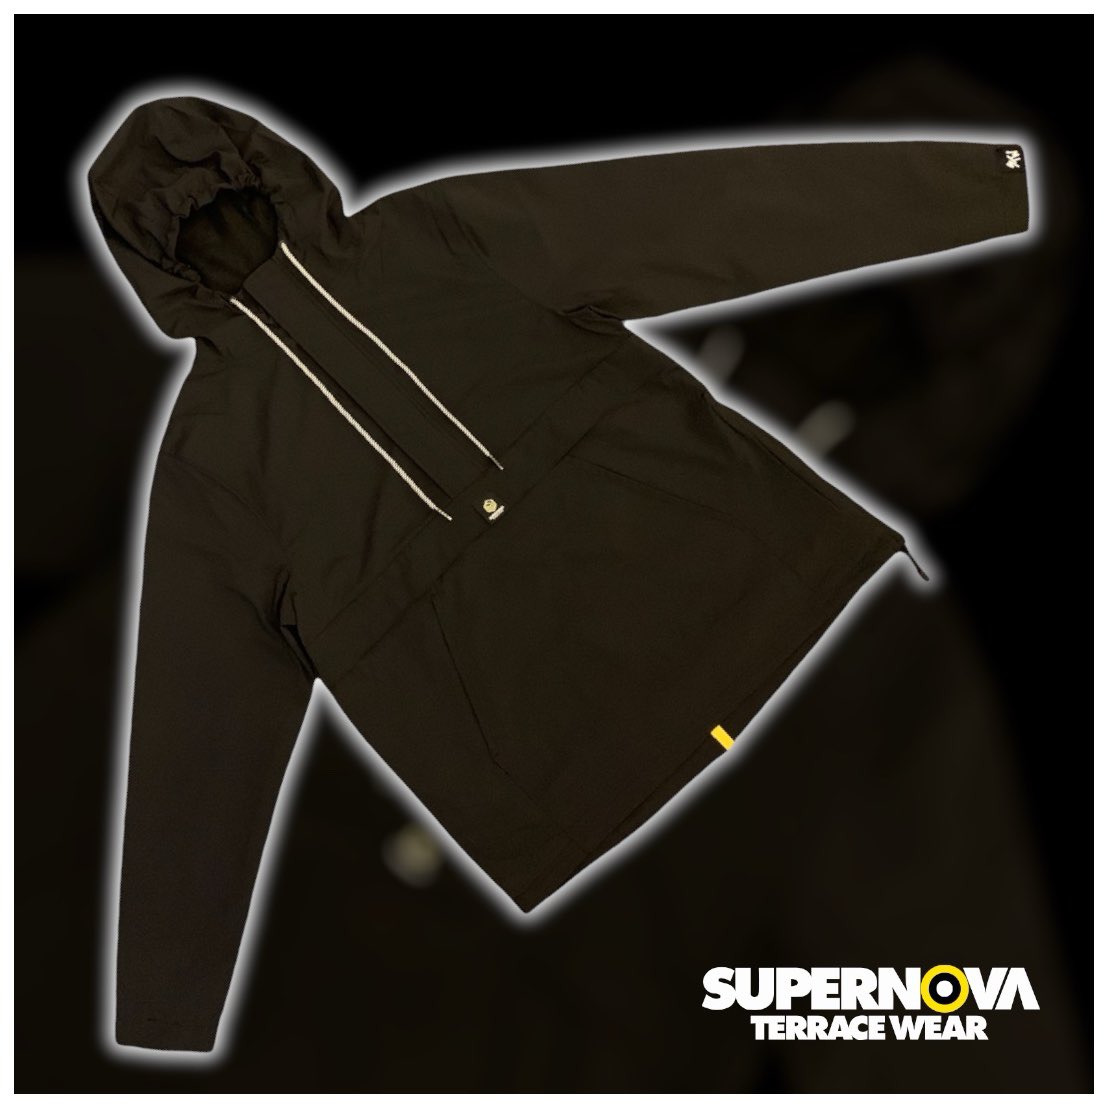 The Smock x STW

Perfect for this time of year. Lightweight & showerproof.
Also available in Navy
@ supernovaterracewear.com

Shop Smart. Shop Indie. ✌️😎

#stw #supernova #terracewear